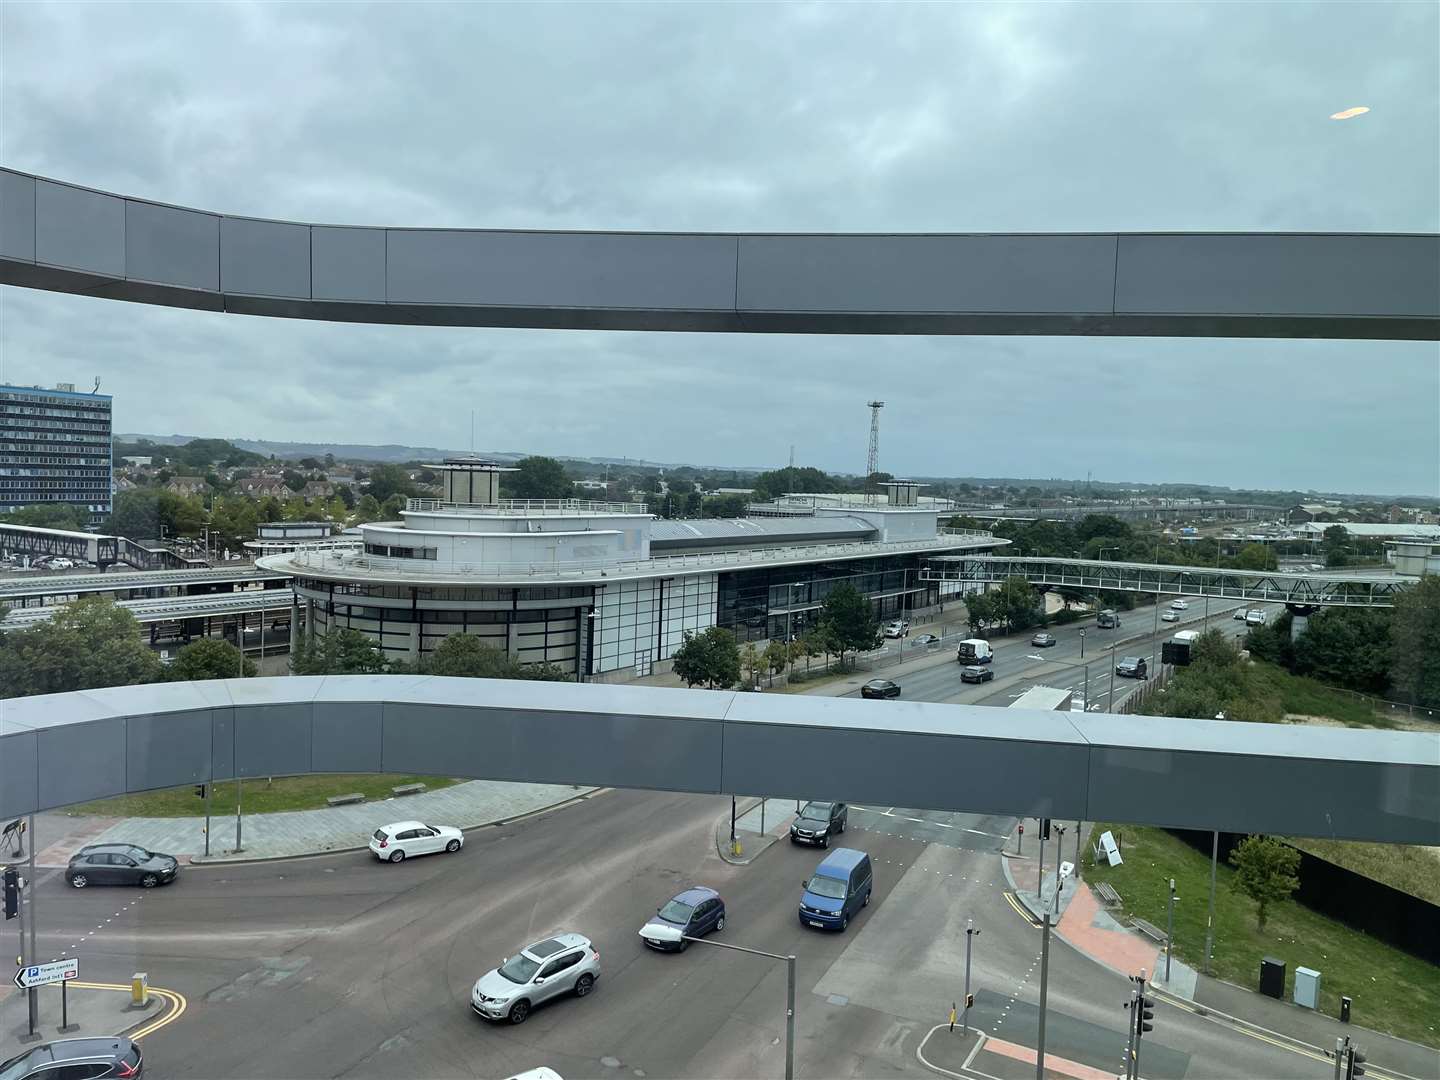 Part of the view from the fifth floor of the hotel showing Ashford International